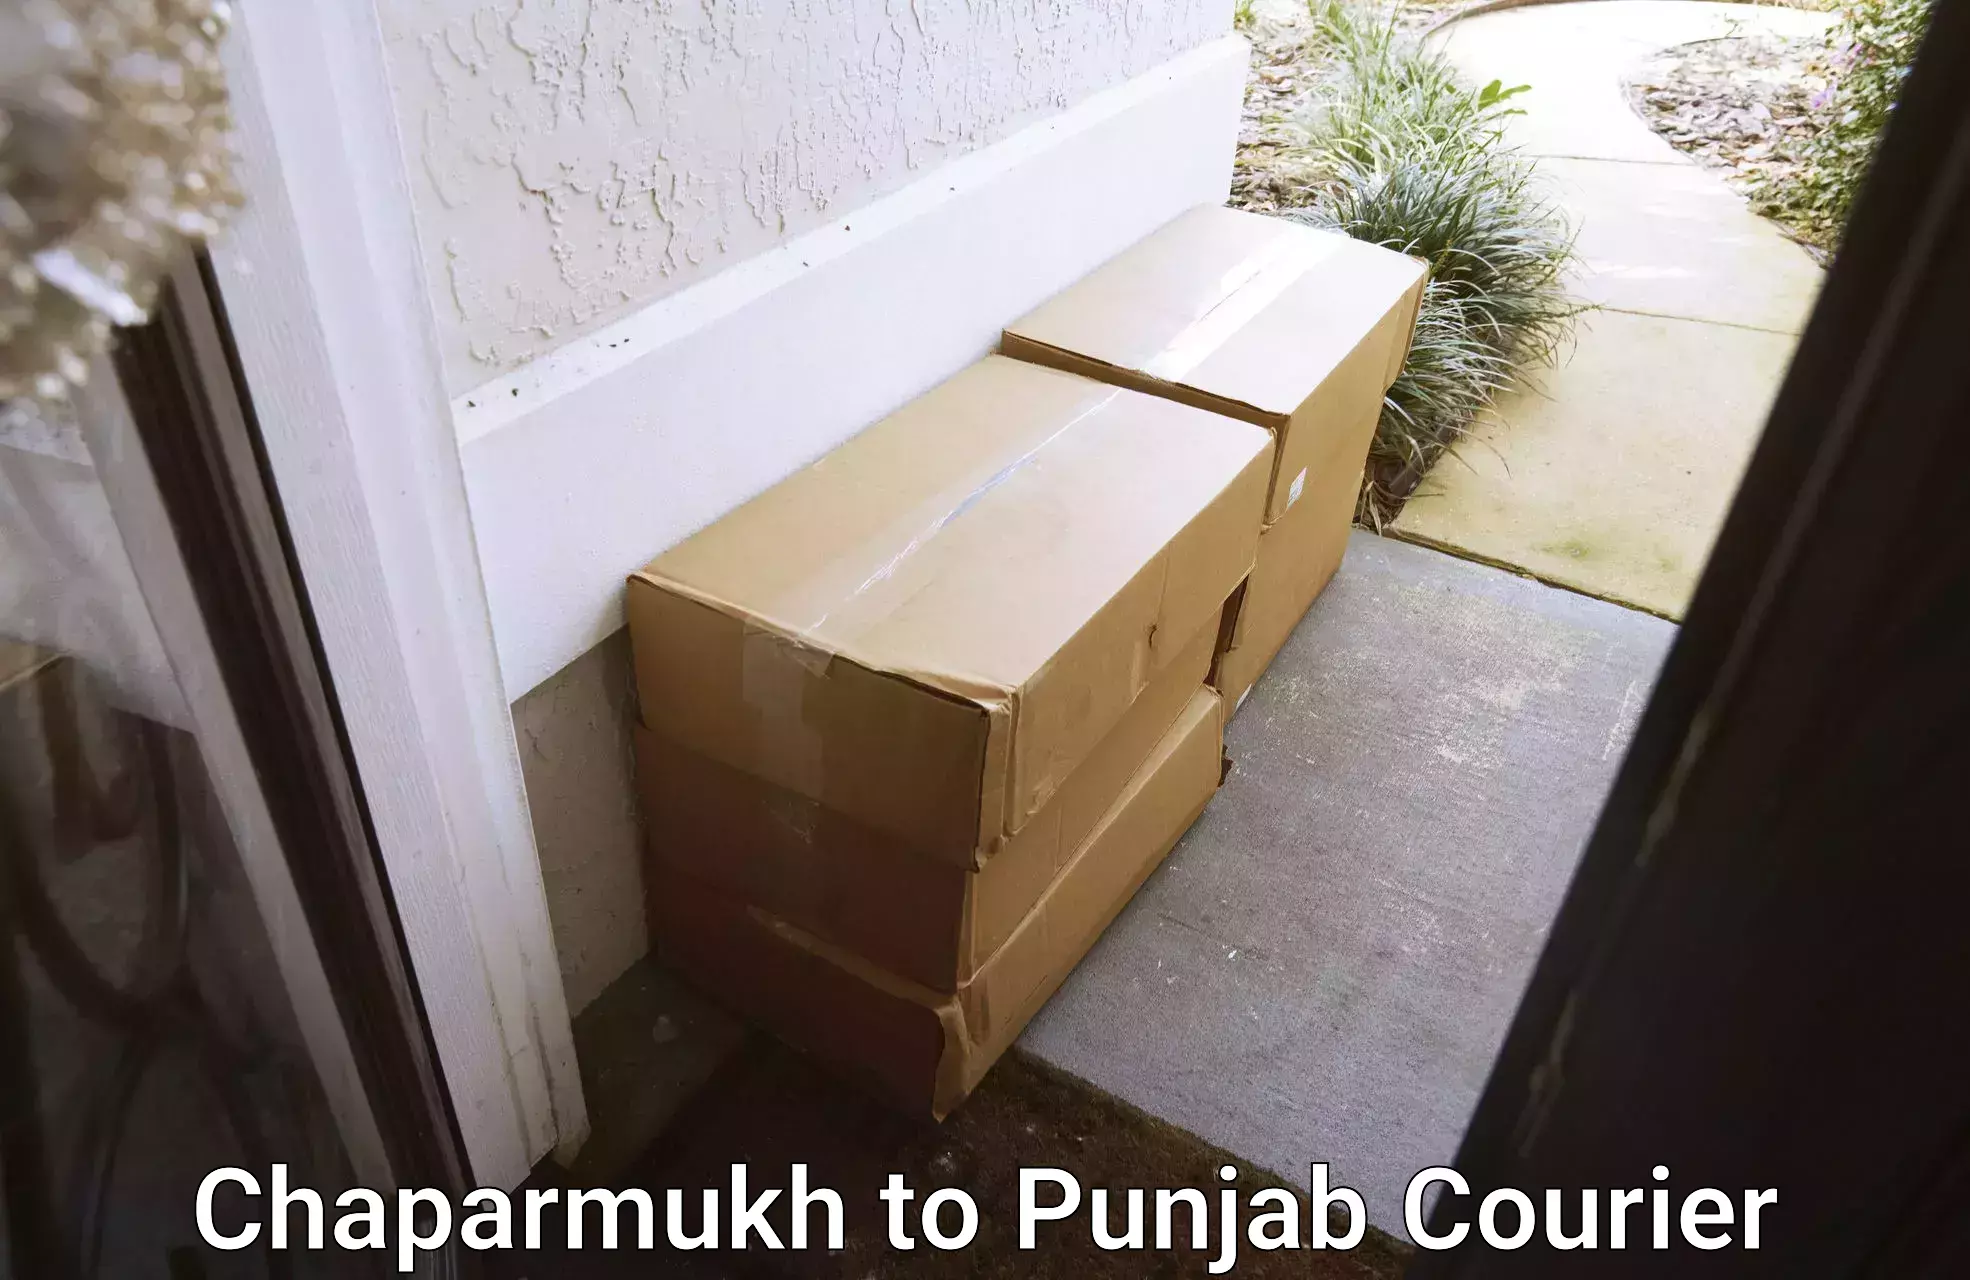 Business delivery service Chaparmukh to Amritsar